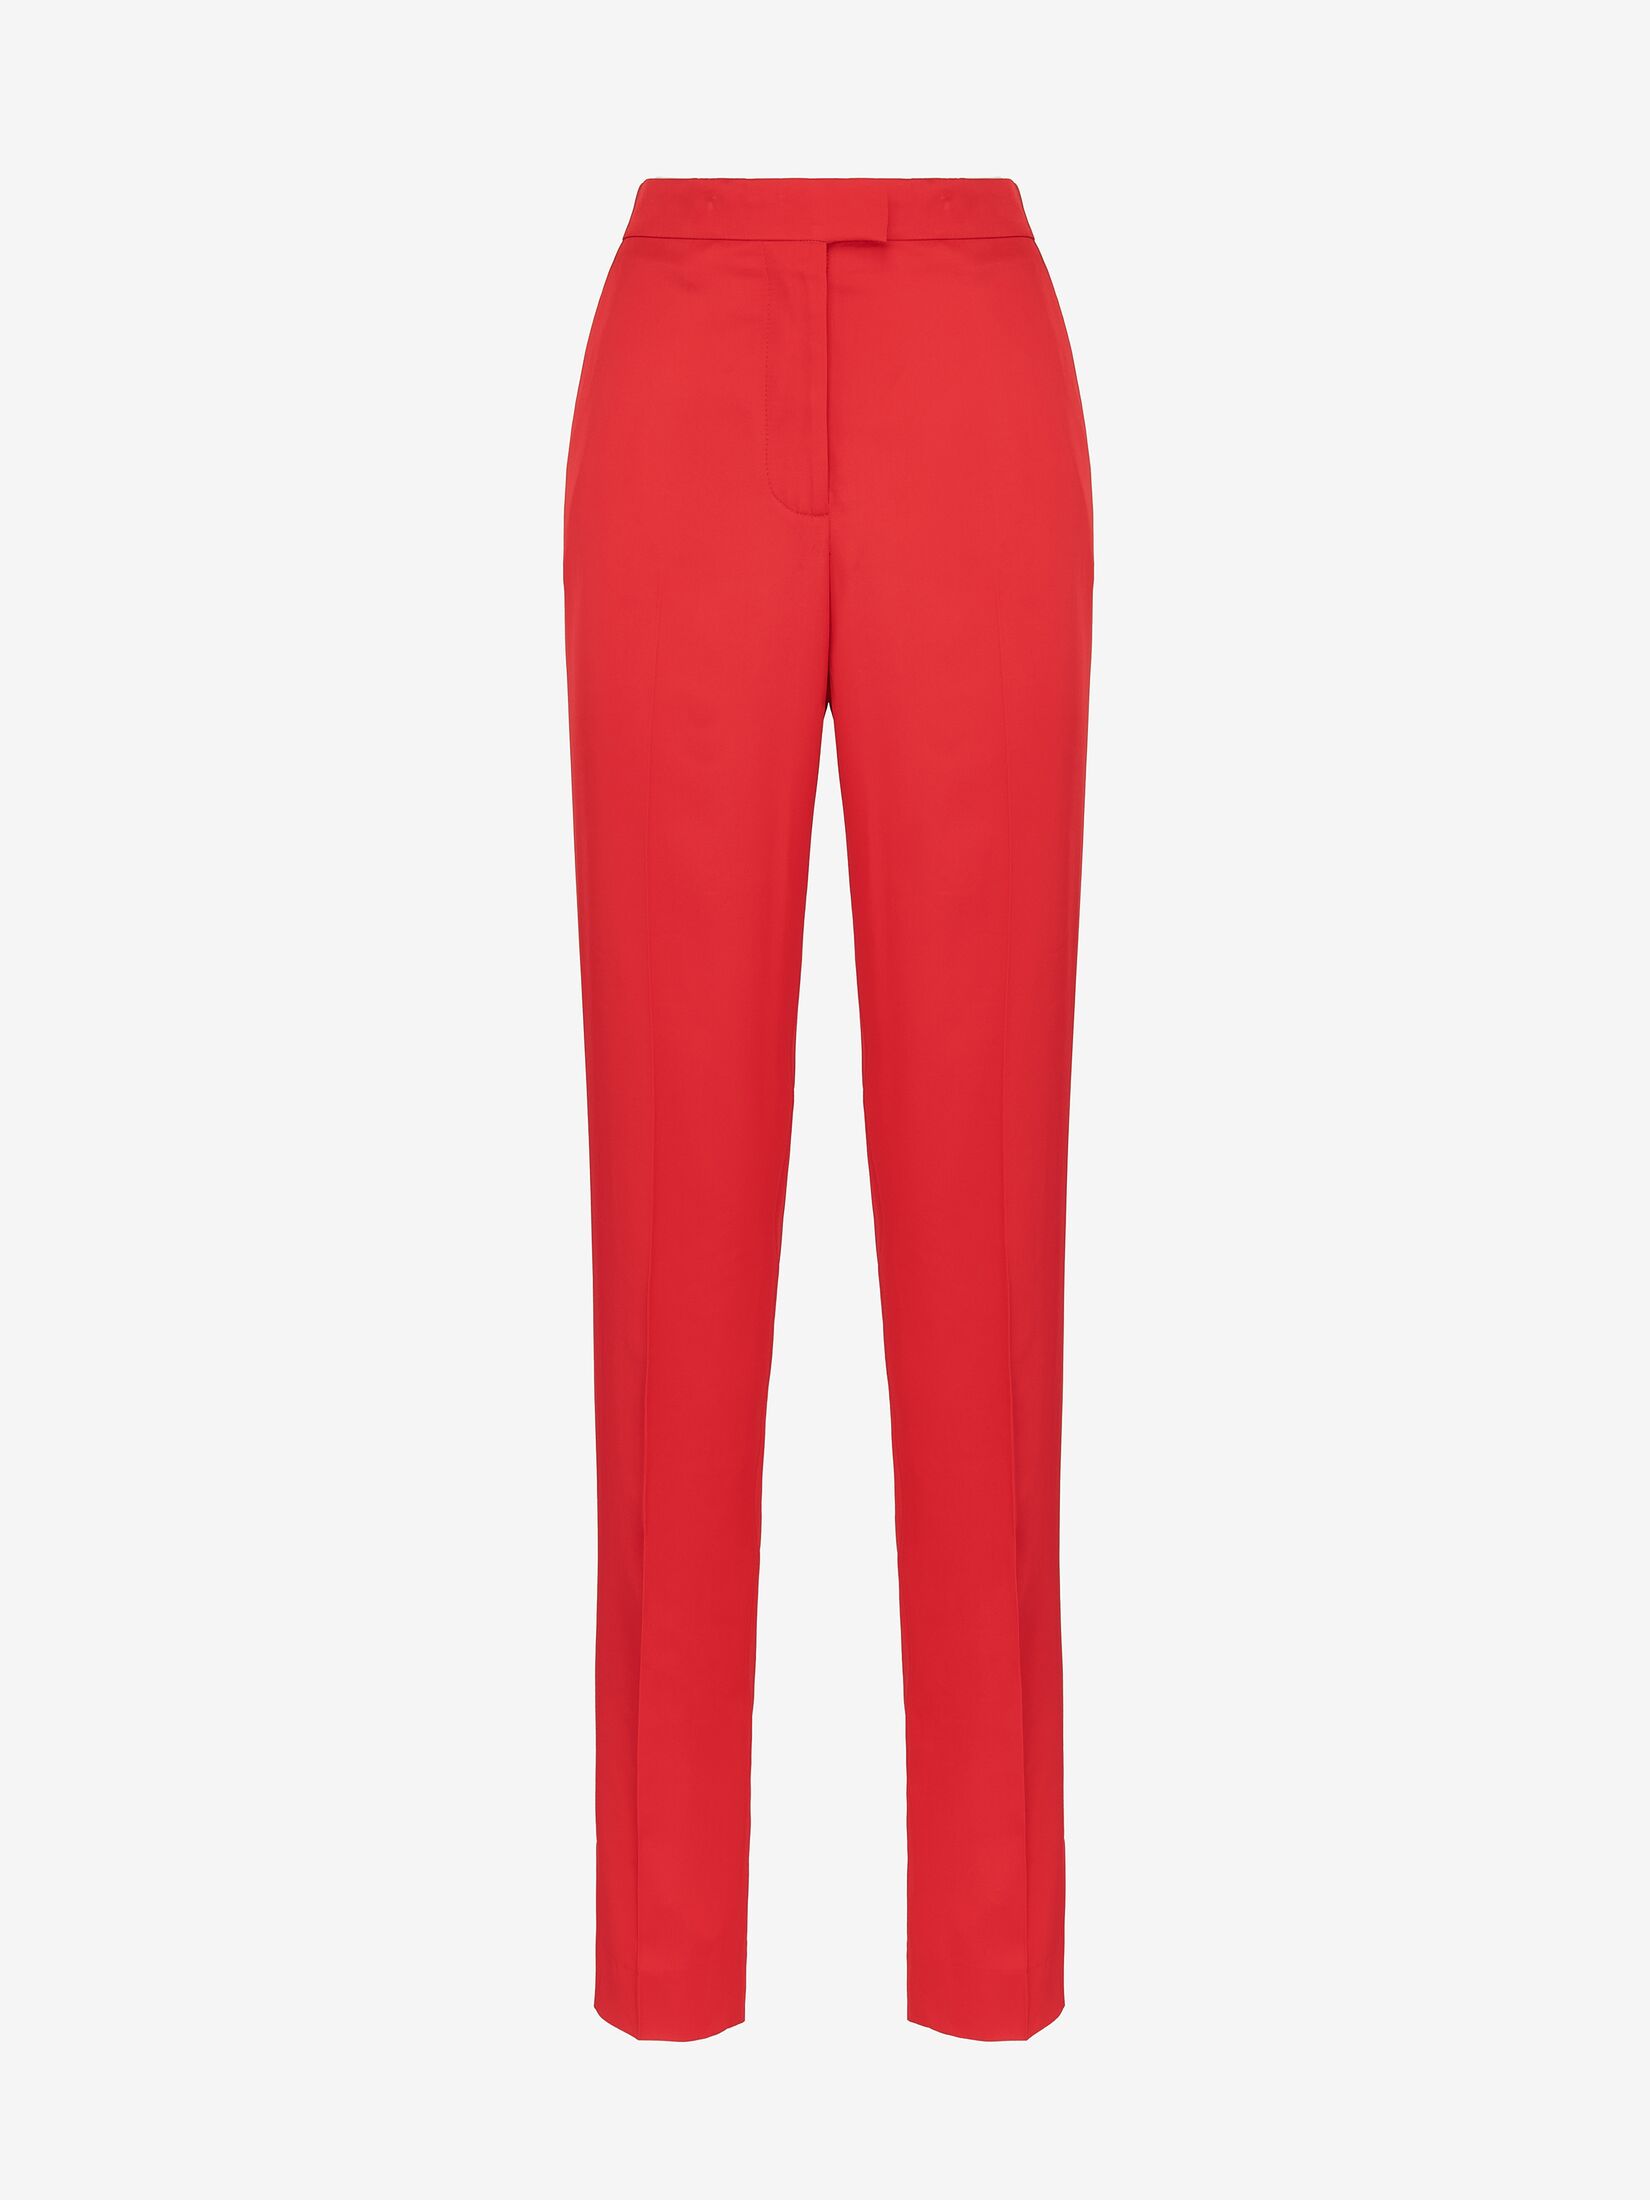 High-waisted Cigarette Trousers